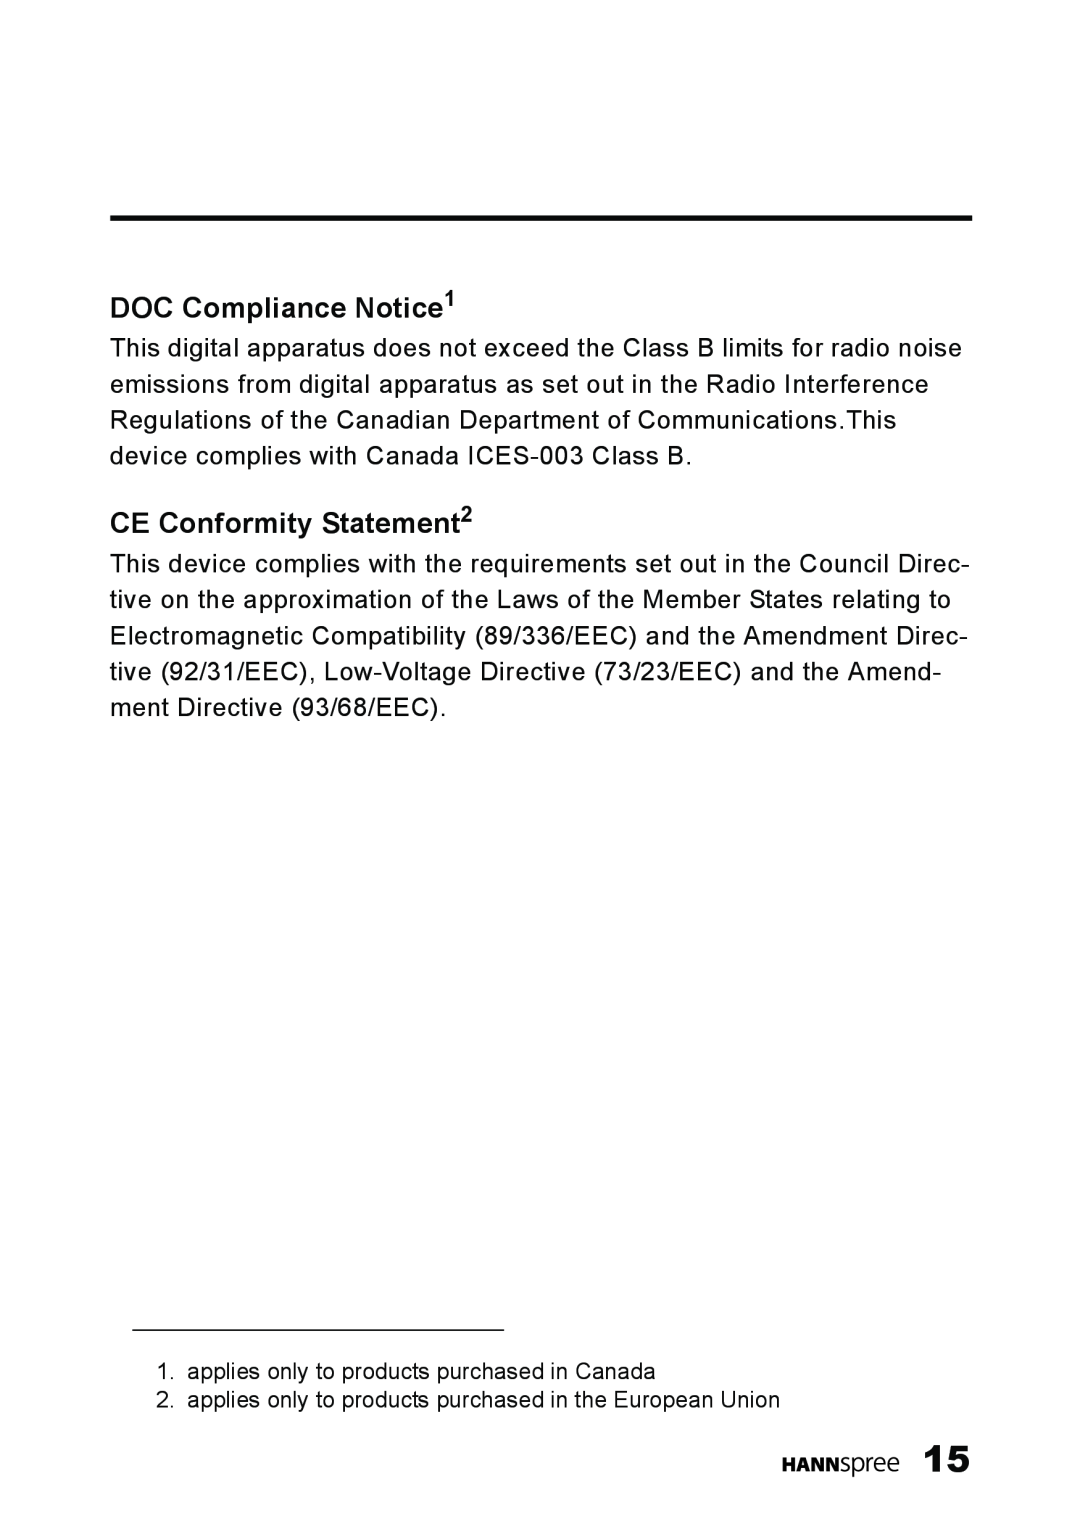 HANNspree ST09-10A1 DOC Compliance Notice1, CE Conformity Statement2, applies only to products purchased in Canada 